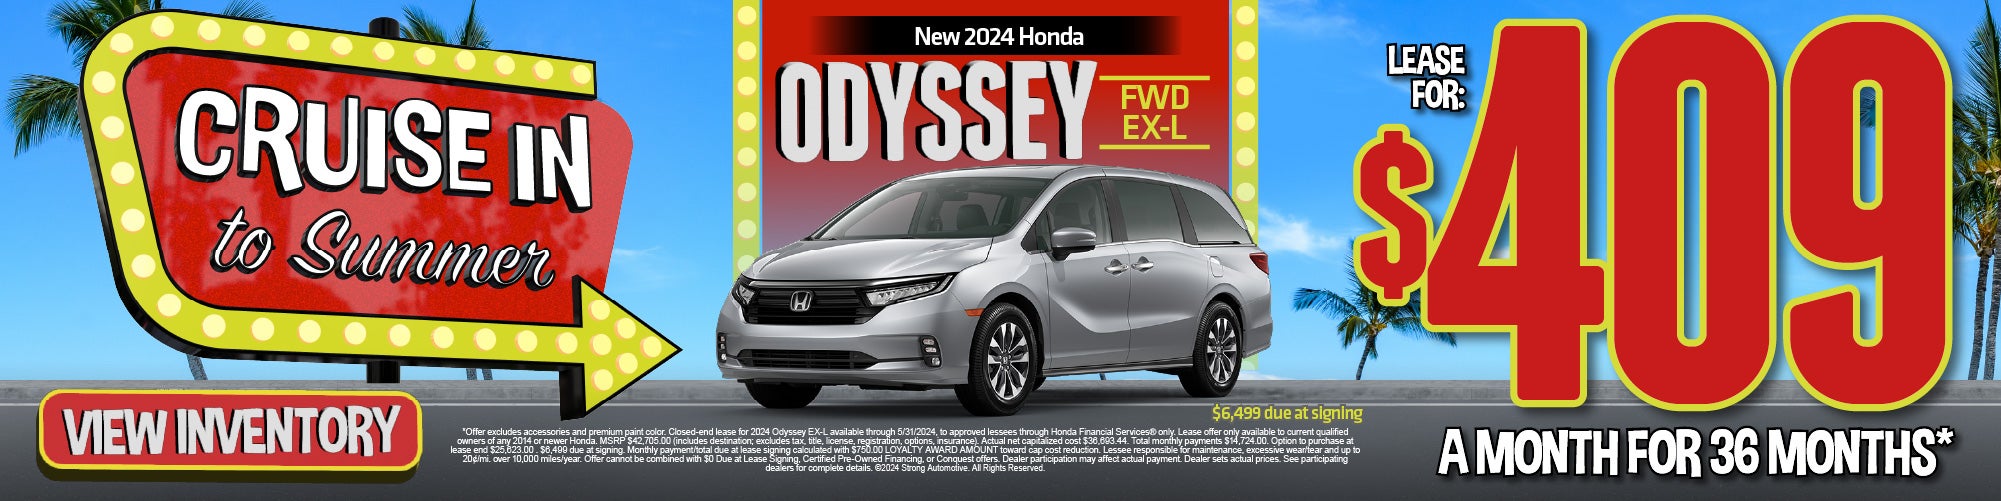 2024 Honda Odyssey FWD EX-L - $409 for 36 months* $6,499 due